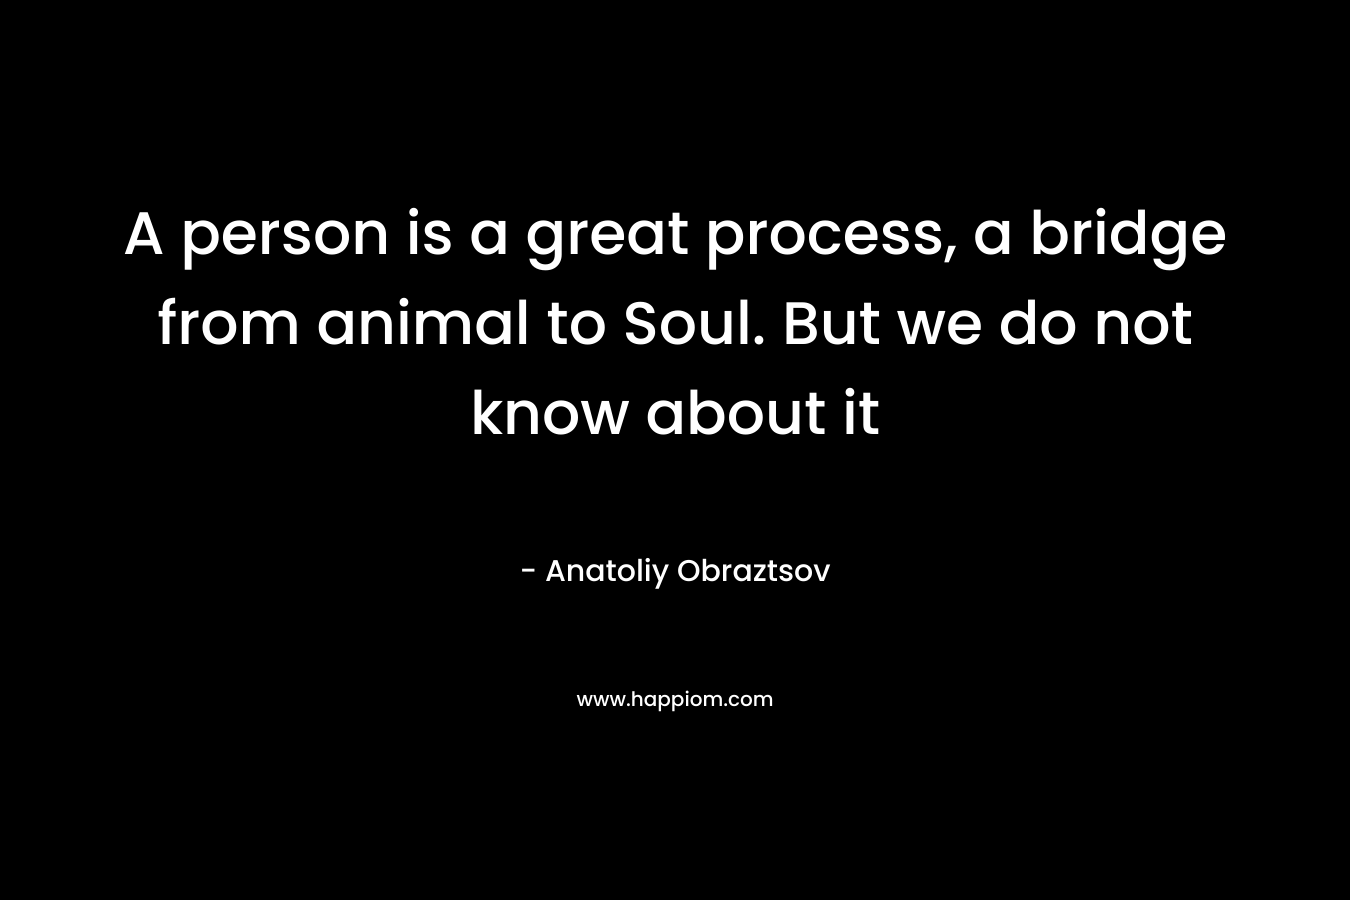 A person is a great process, a bridge from animal to Soul. But we do not know about it